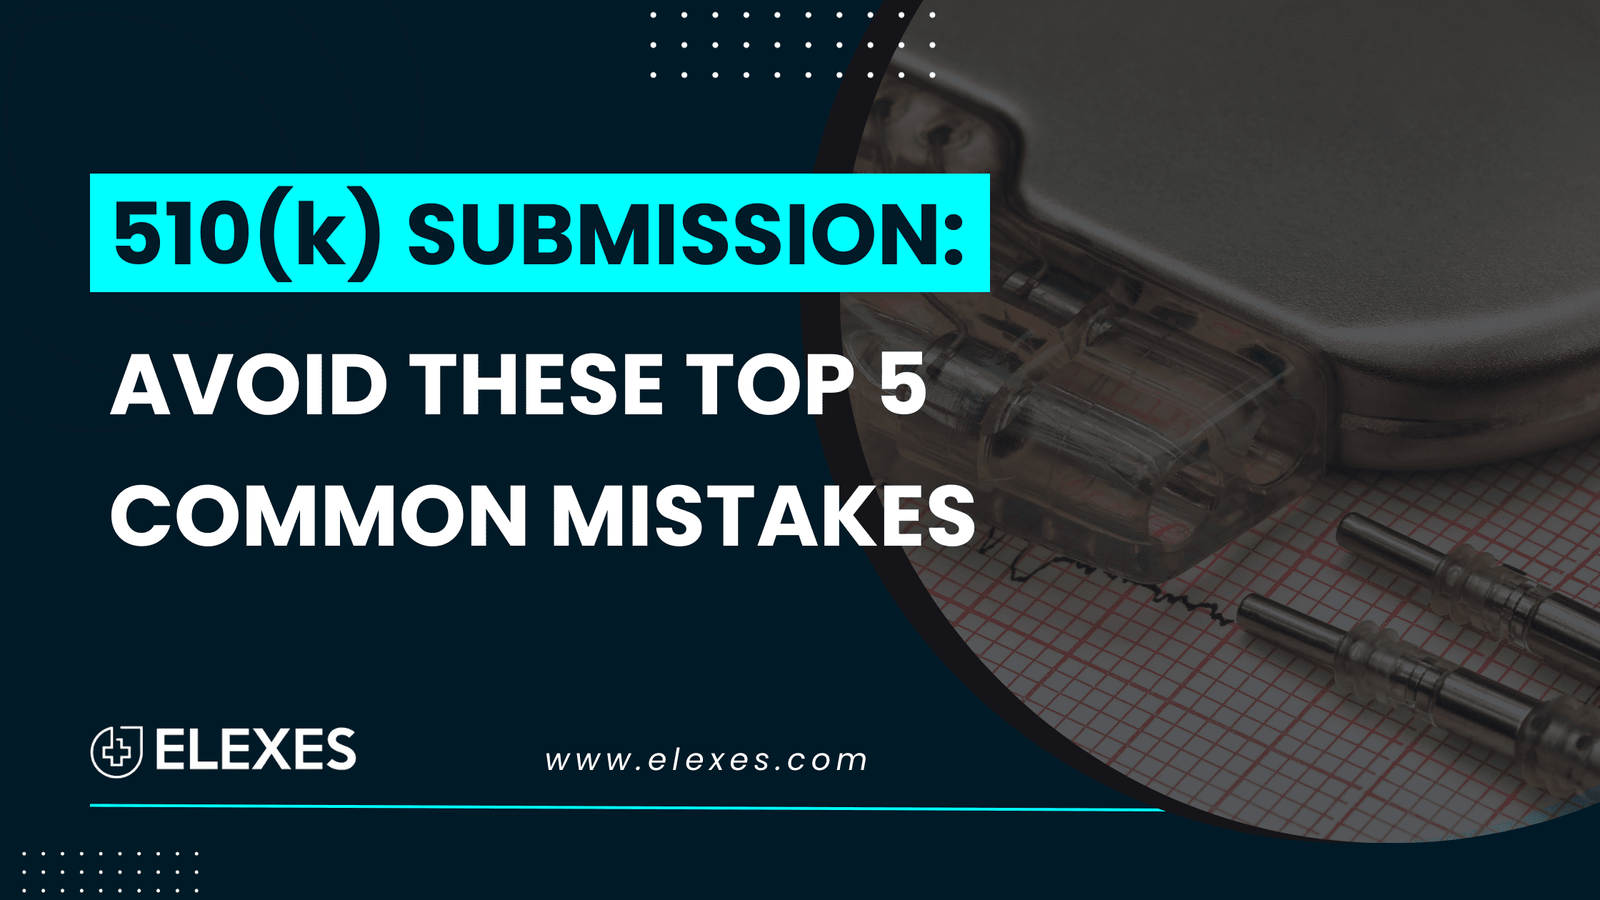 Top 5 Common Mistakes to Avoid in the 510(k) Submission